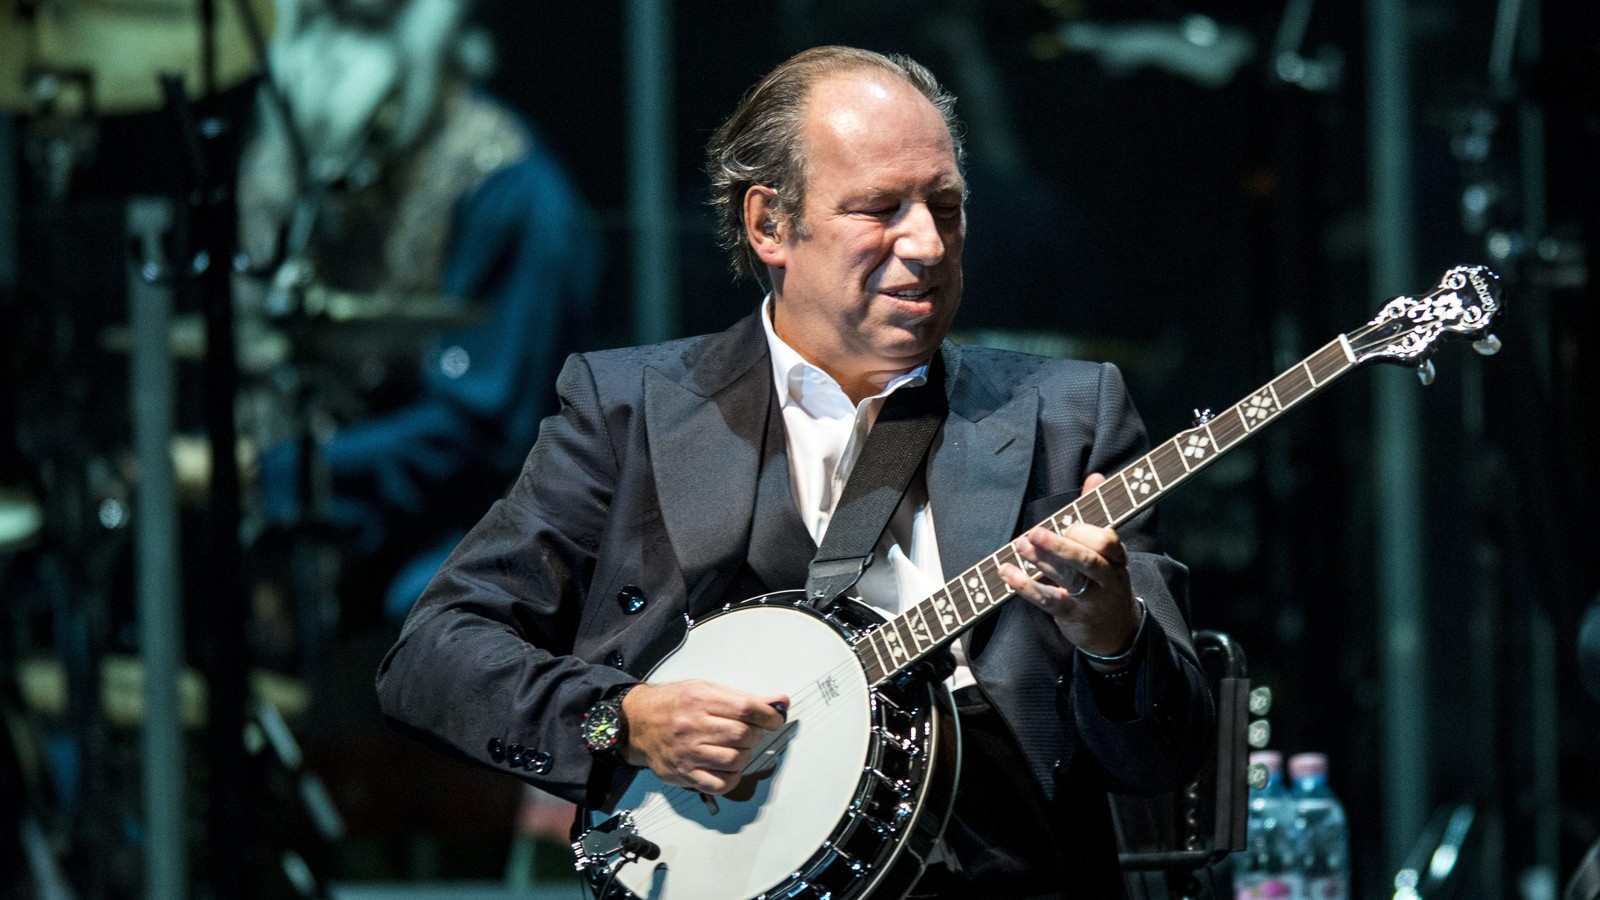 Hans Zimmer Extends First-Ever North American Tour